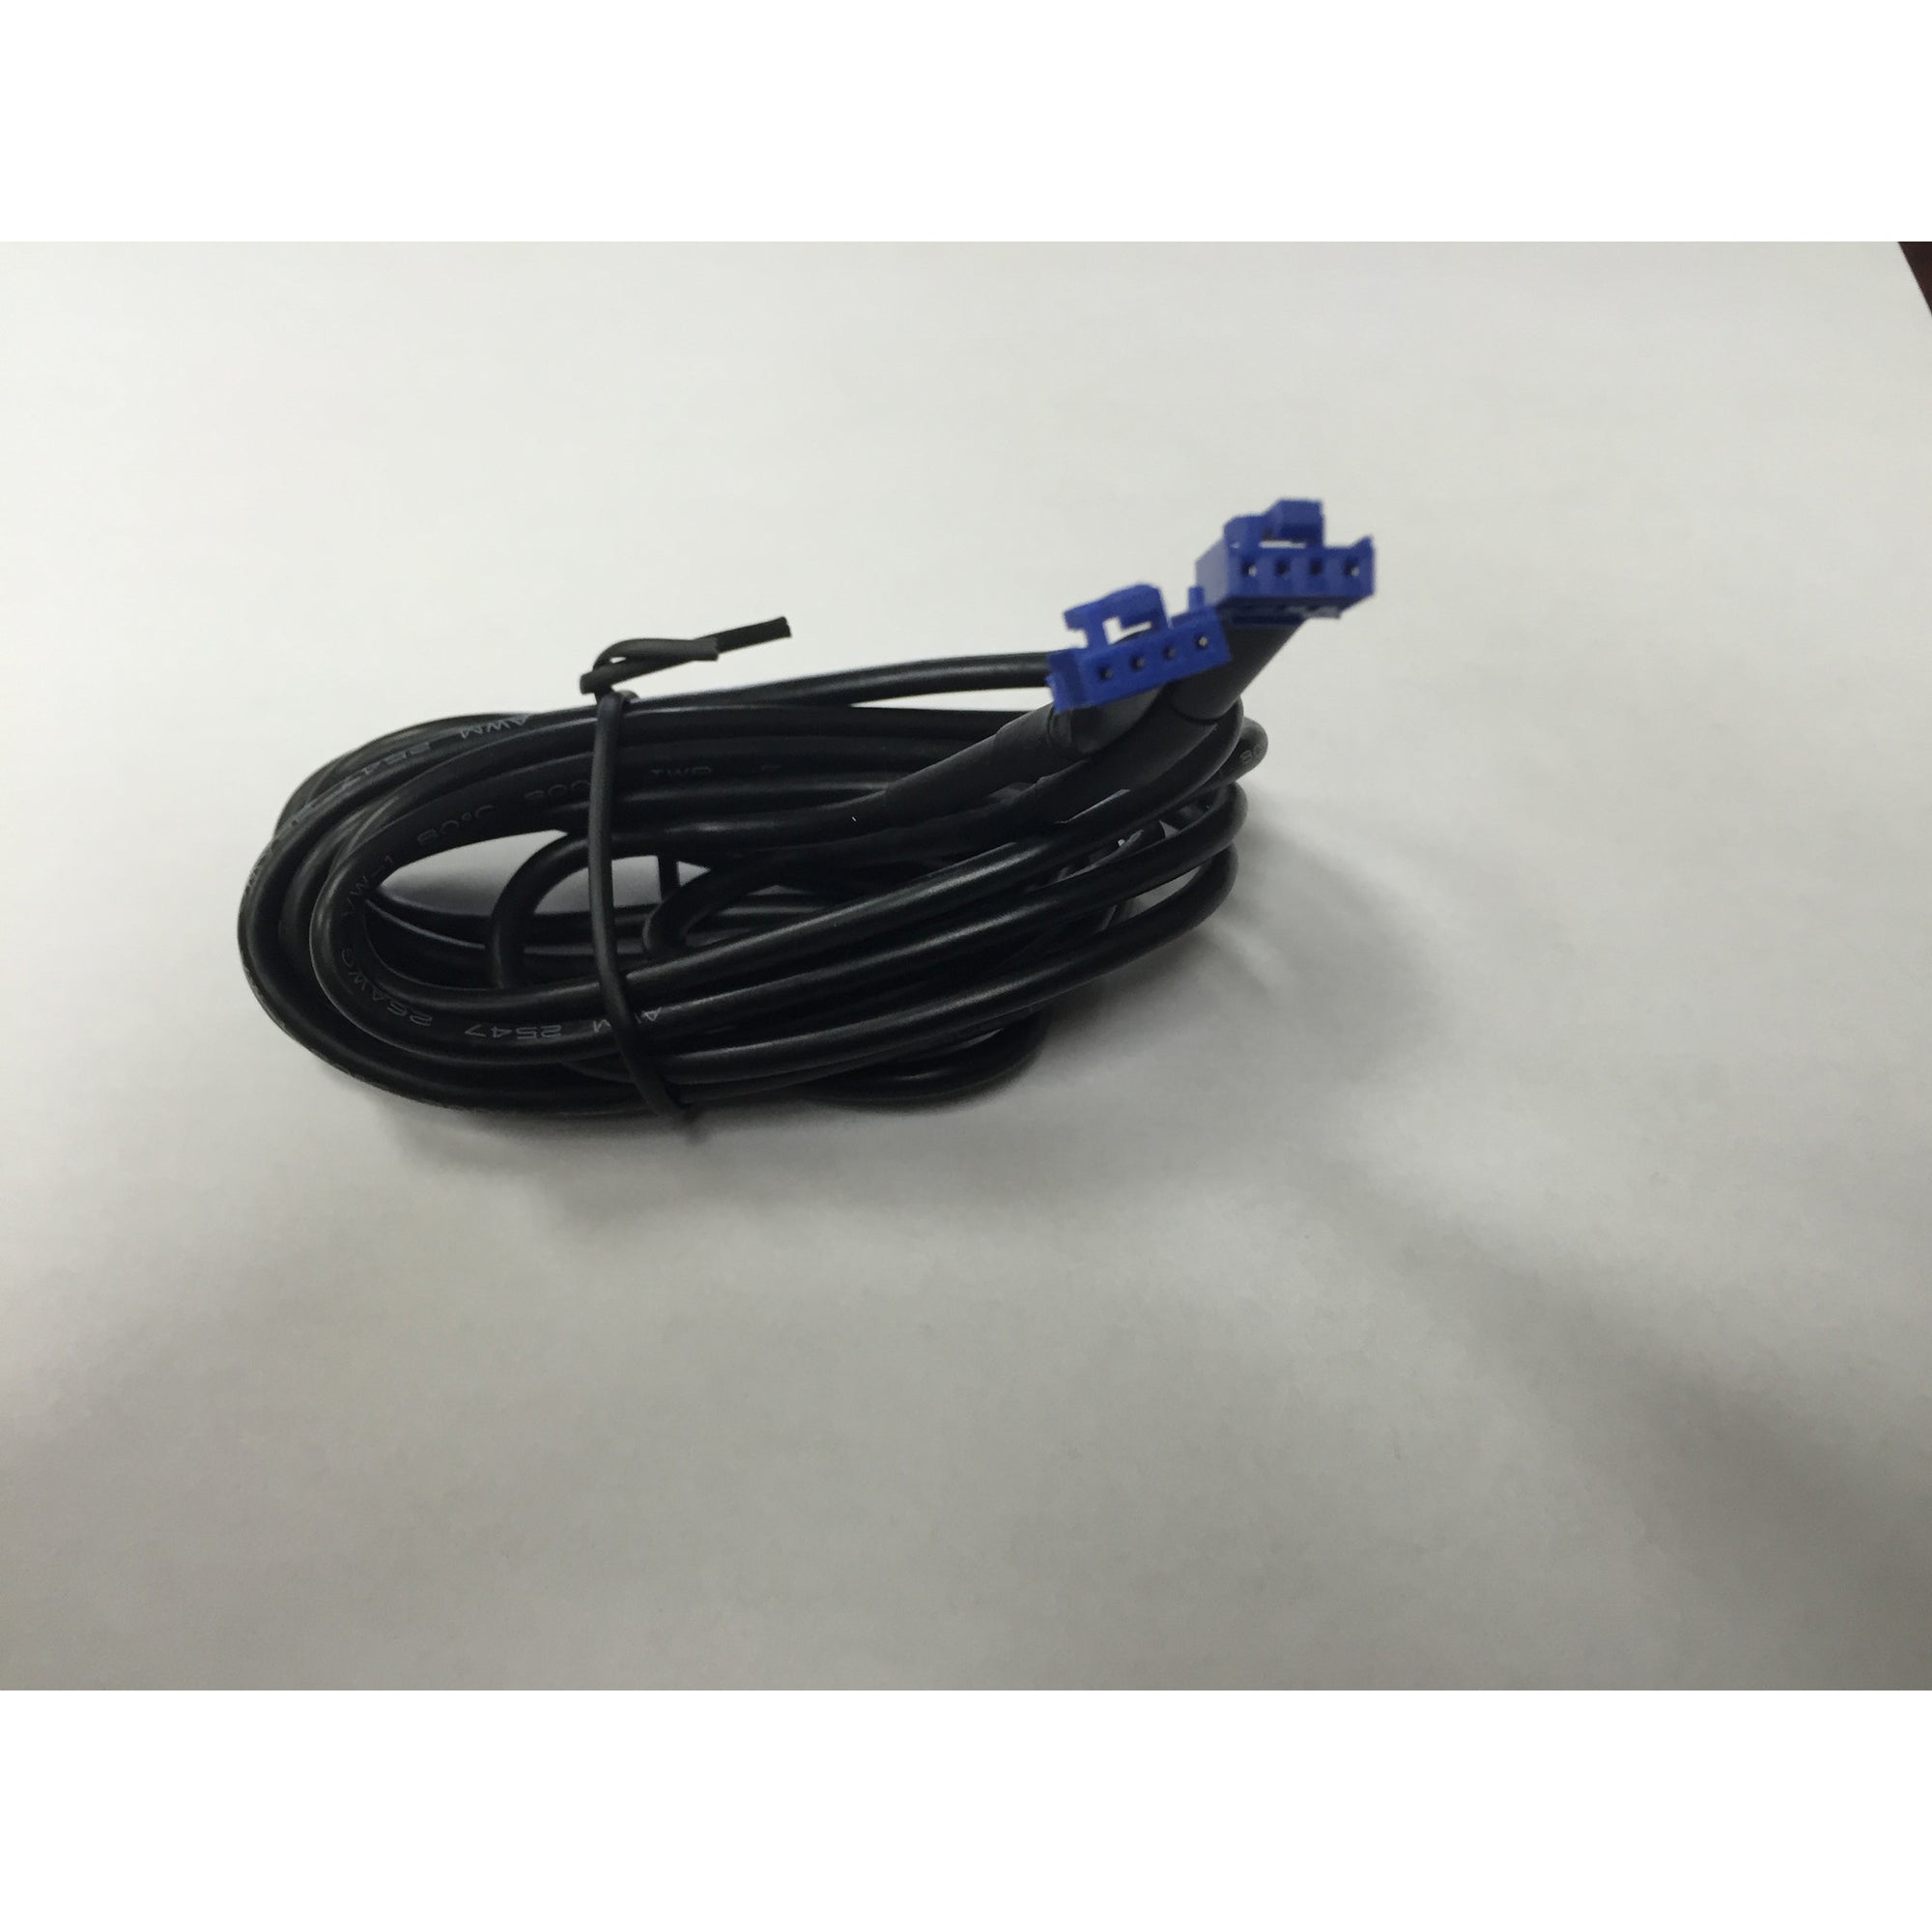 Compustar 2WFM-AS/AC 4 Pin to 4 Pin Antenna Cable - Lockdown Security